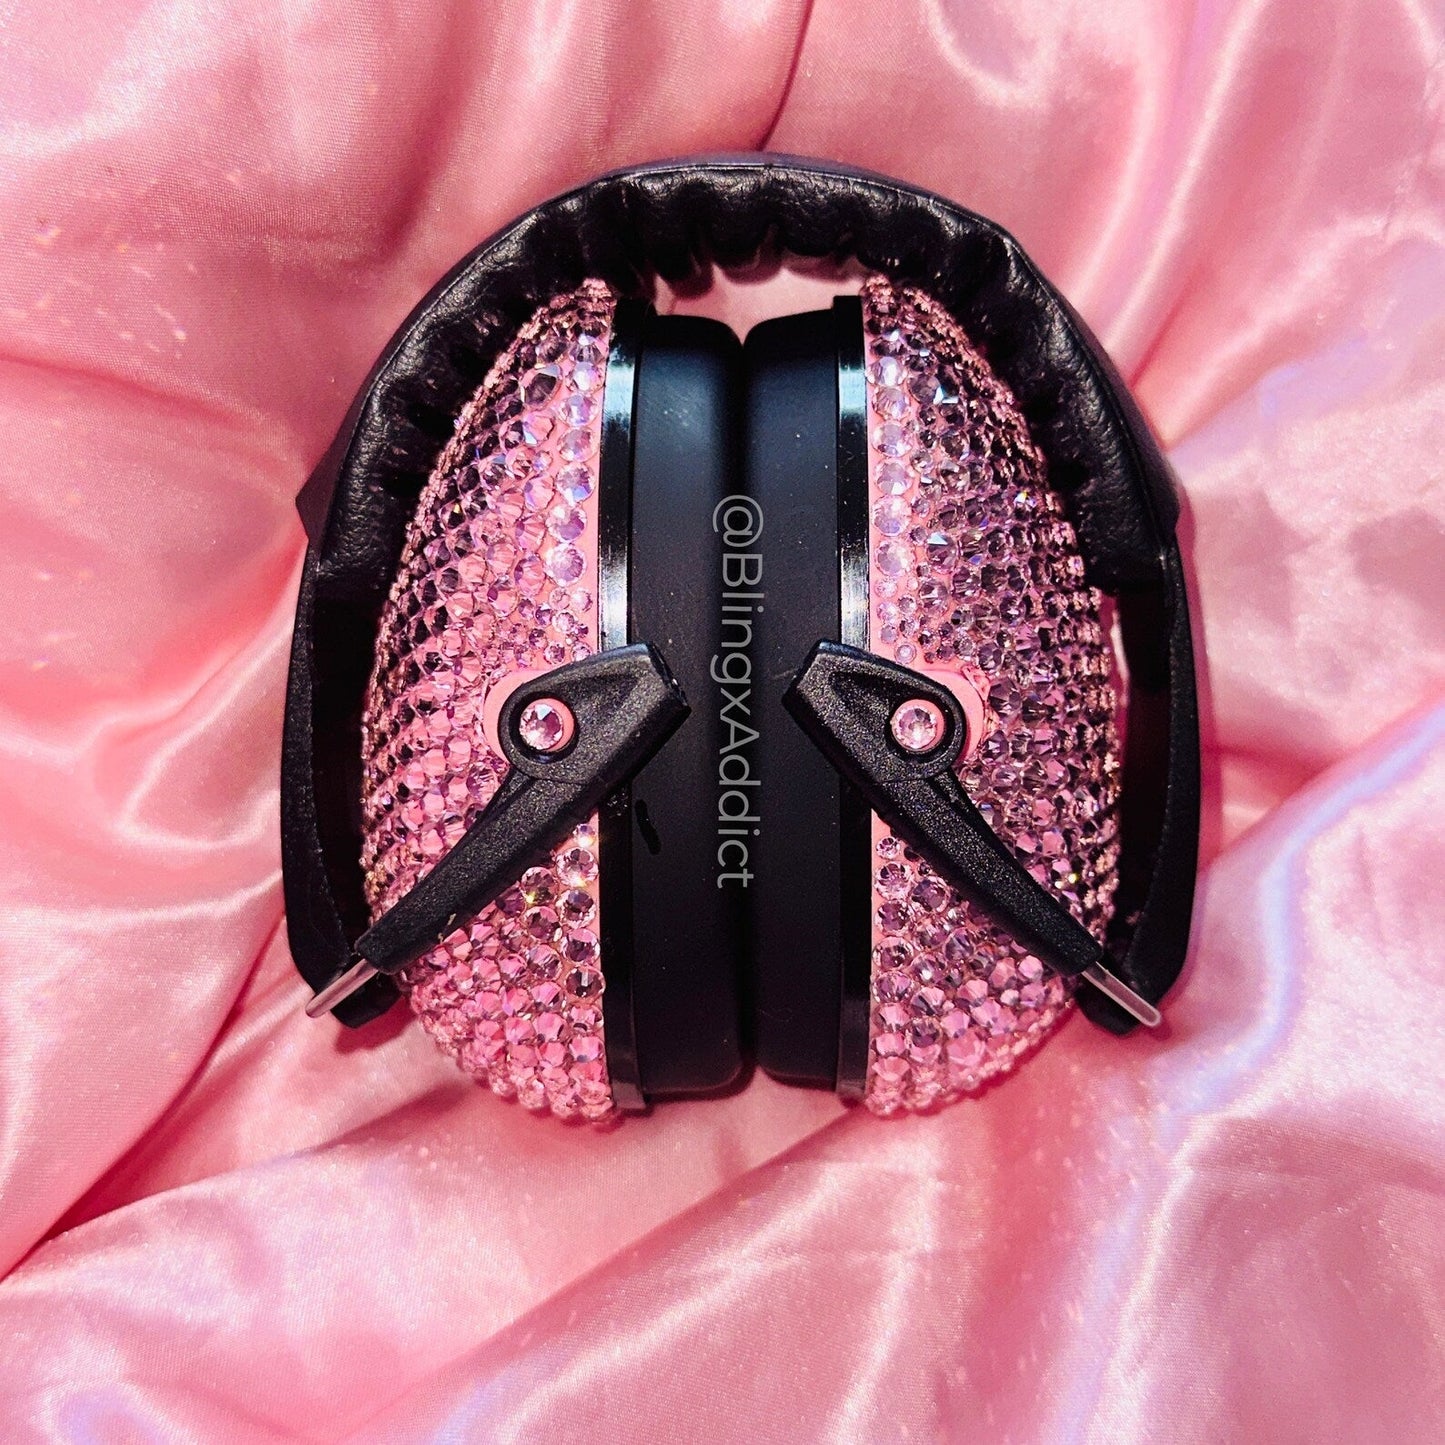 Crystalized Hearing Protection and Noise Reduction Earmuffs Lightweight, Adjustable and Foldable NRR 20dB Light Pink CLOTHING, SHOES & ACCESSORIES by BlingxAddict | BlingxAddict